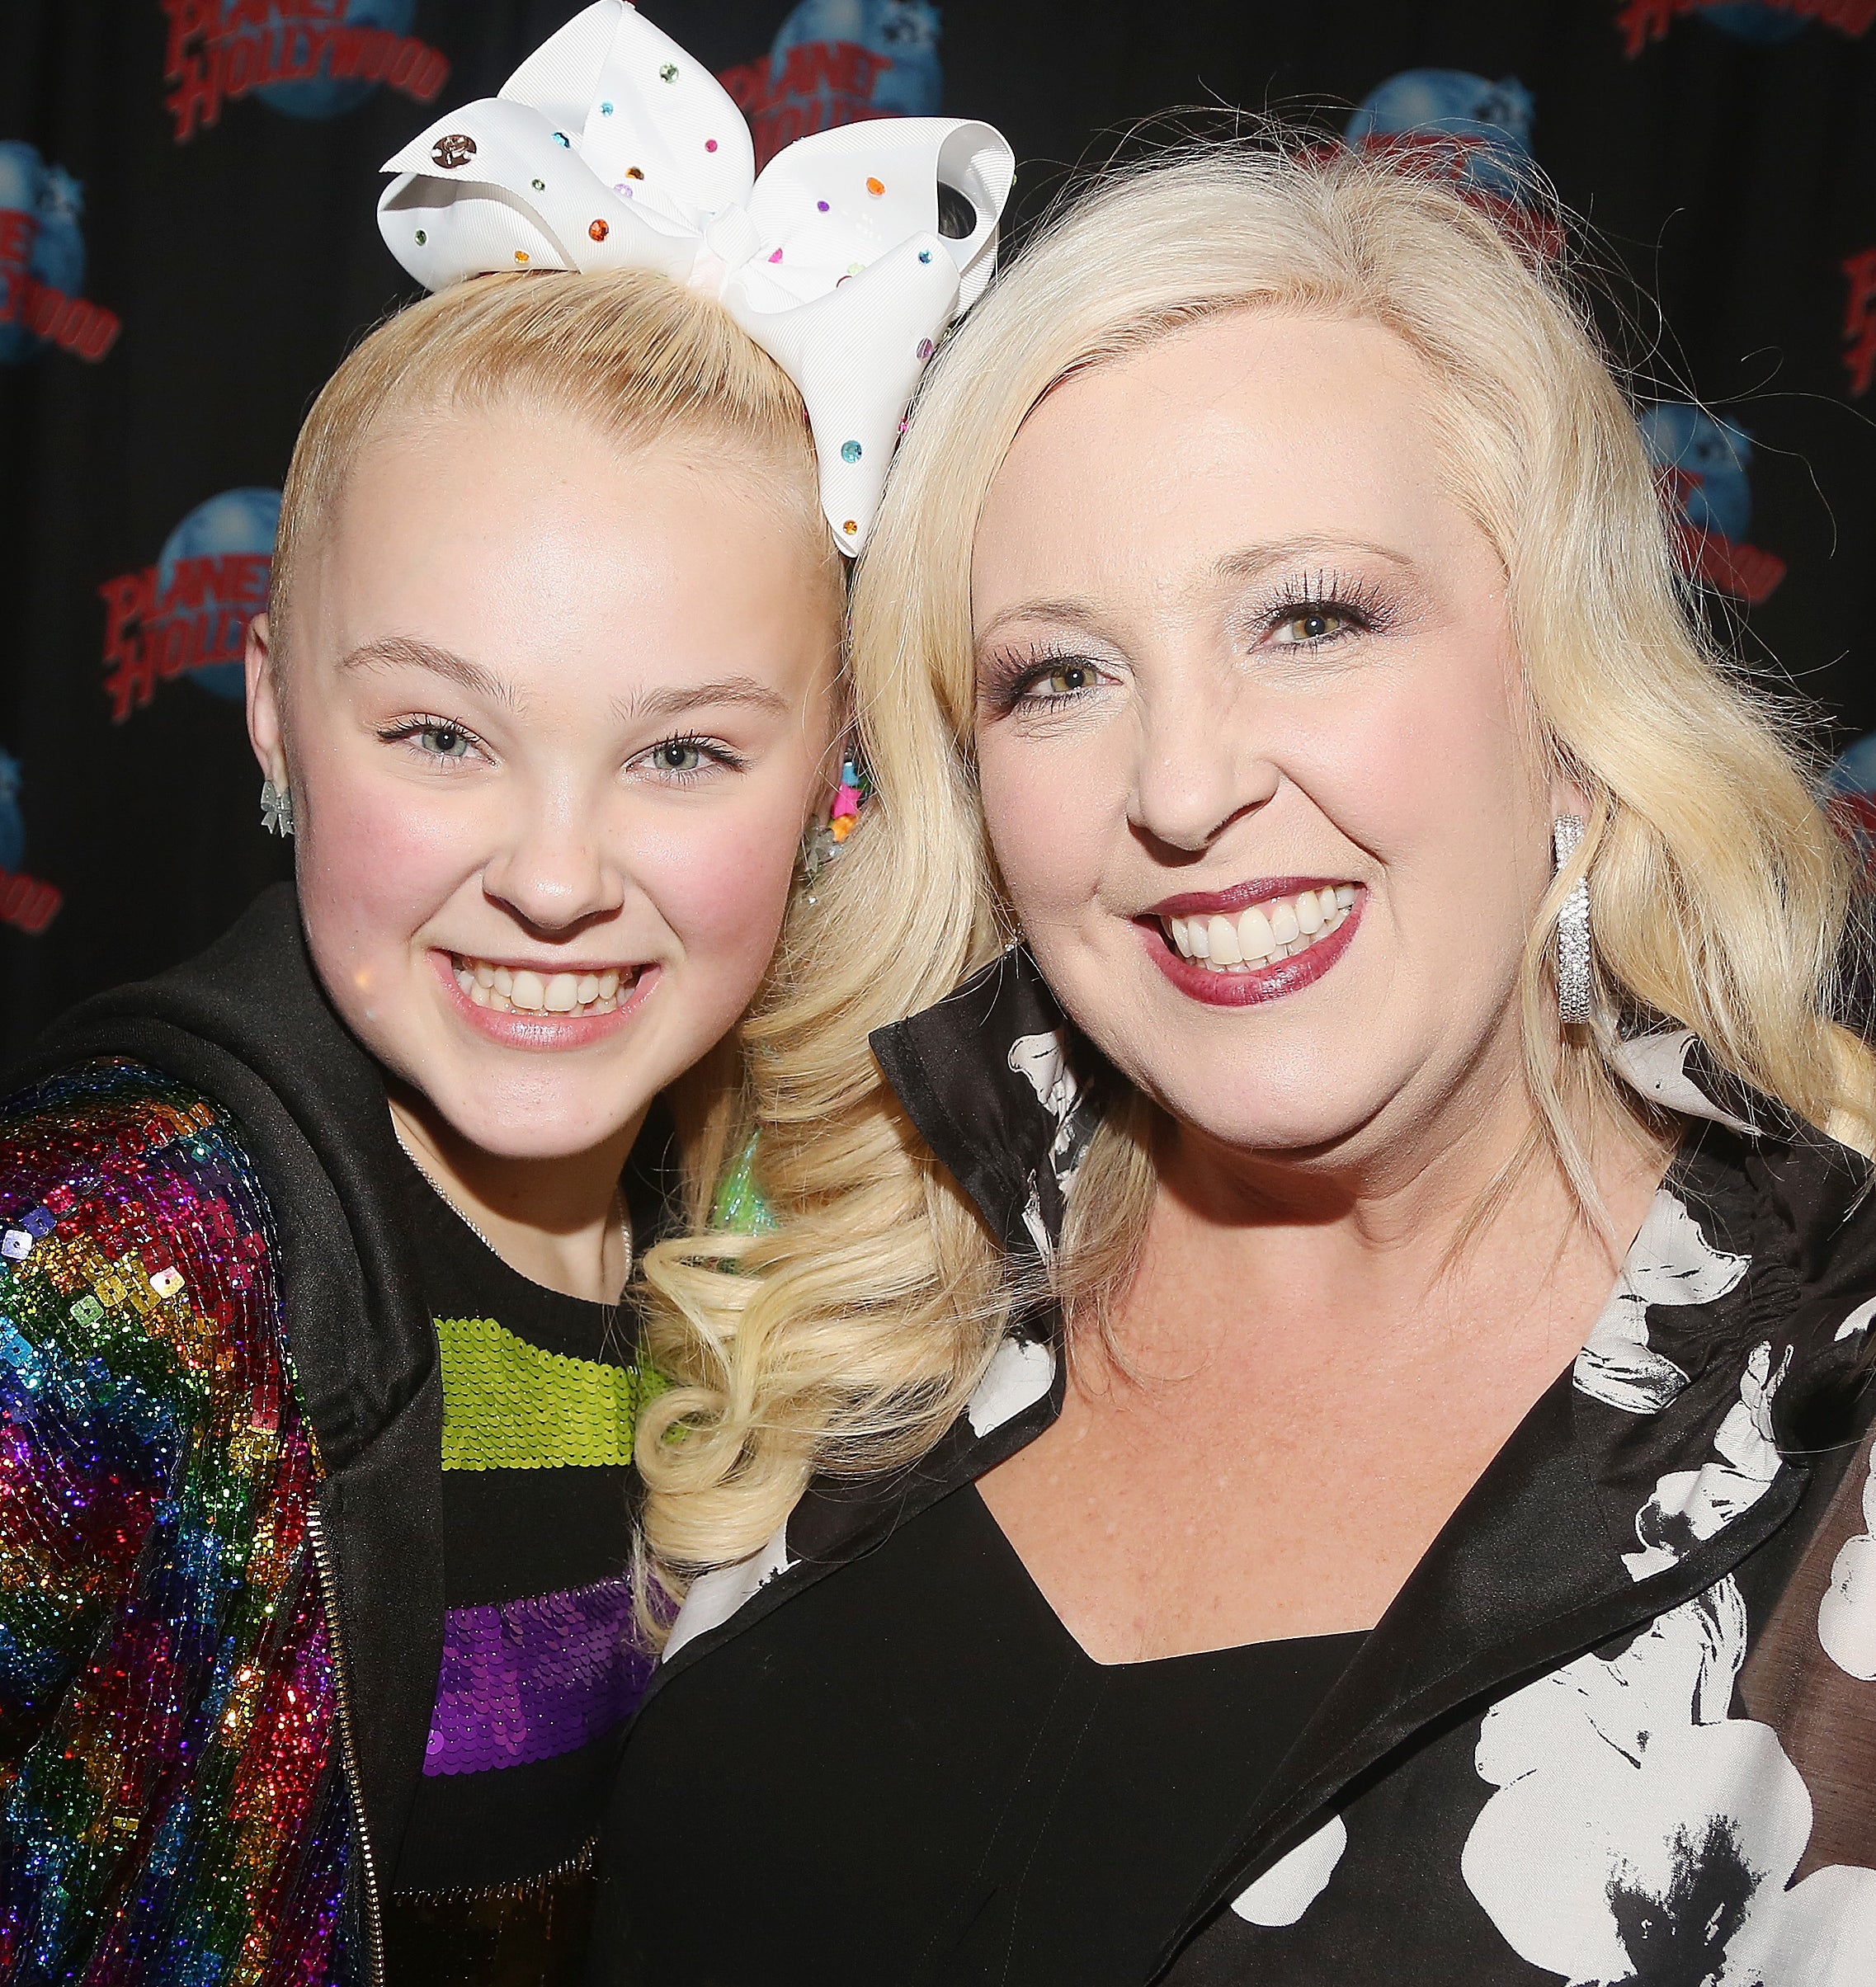 JoJo Siwa in a sequined top posing with her mother, Jessalynn Siwa, who wears a floral top